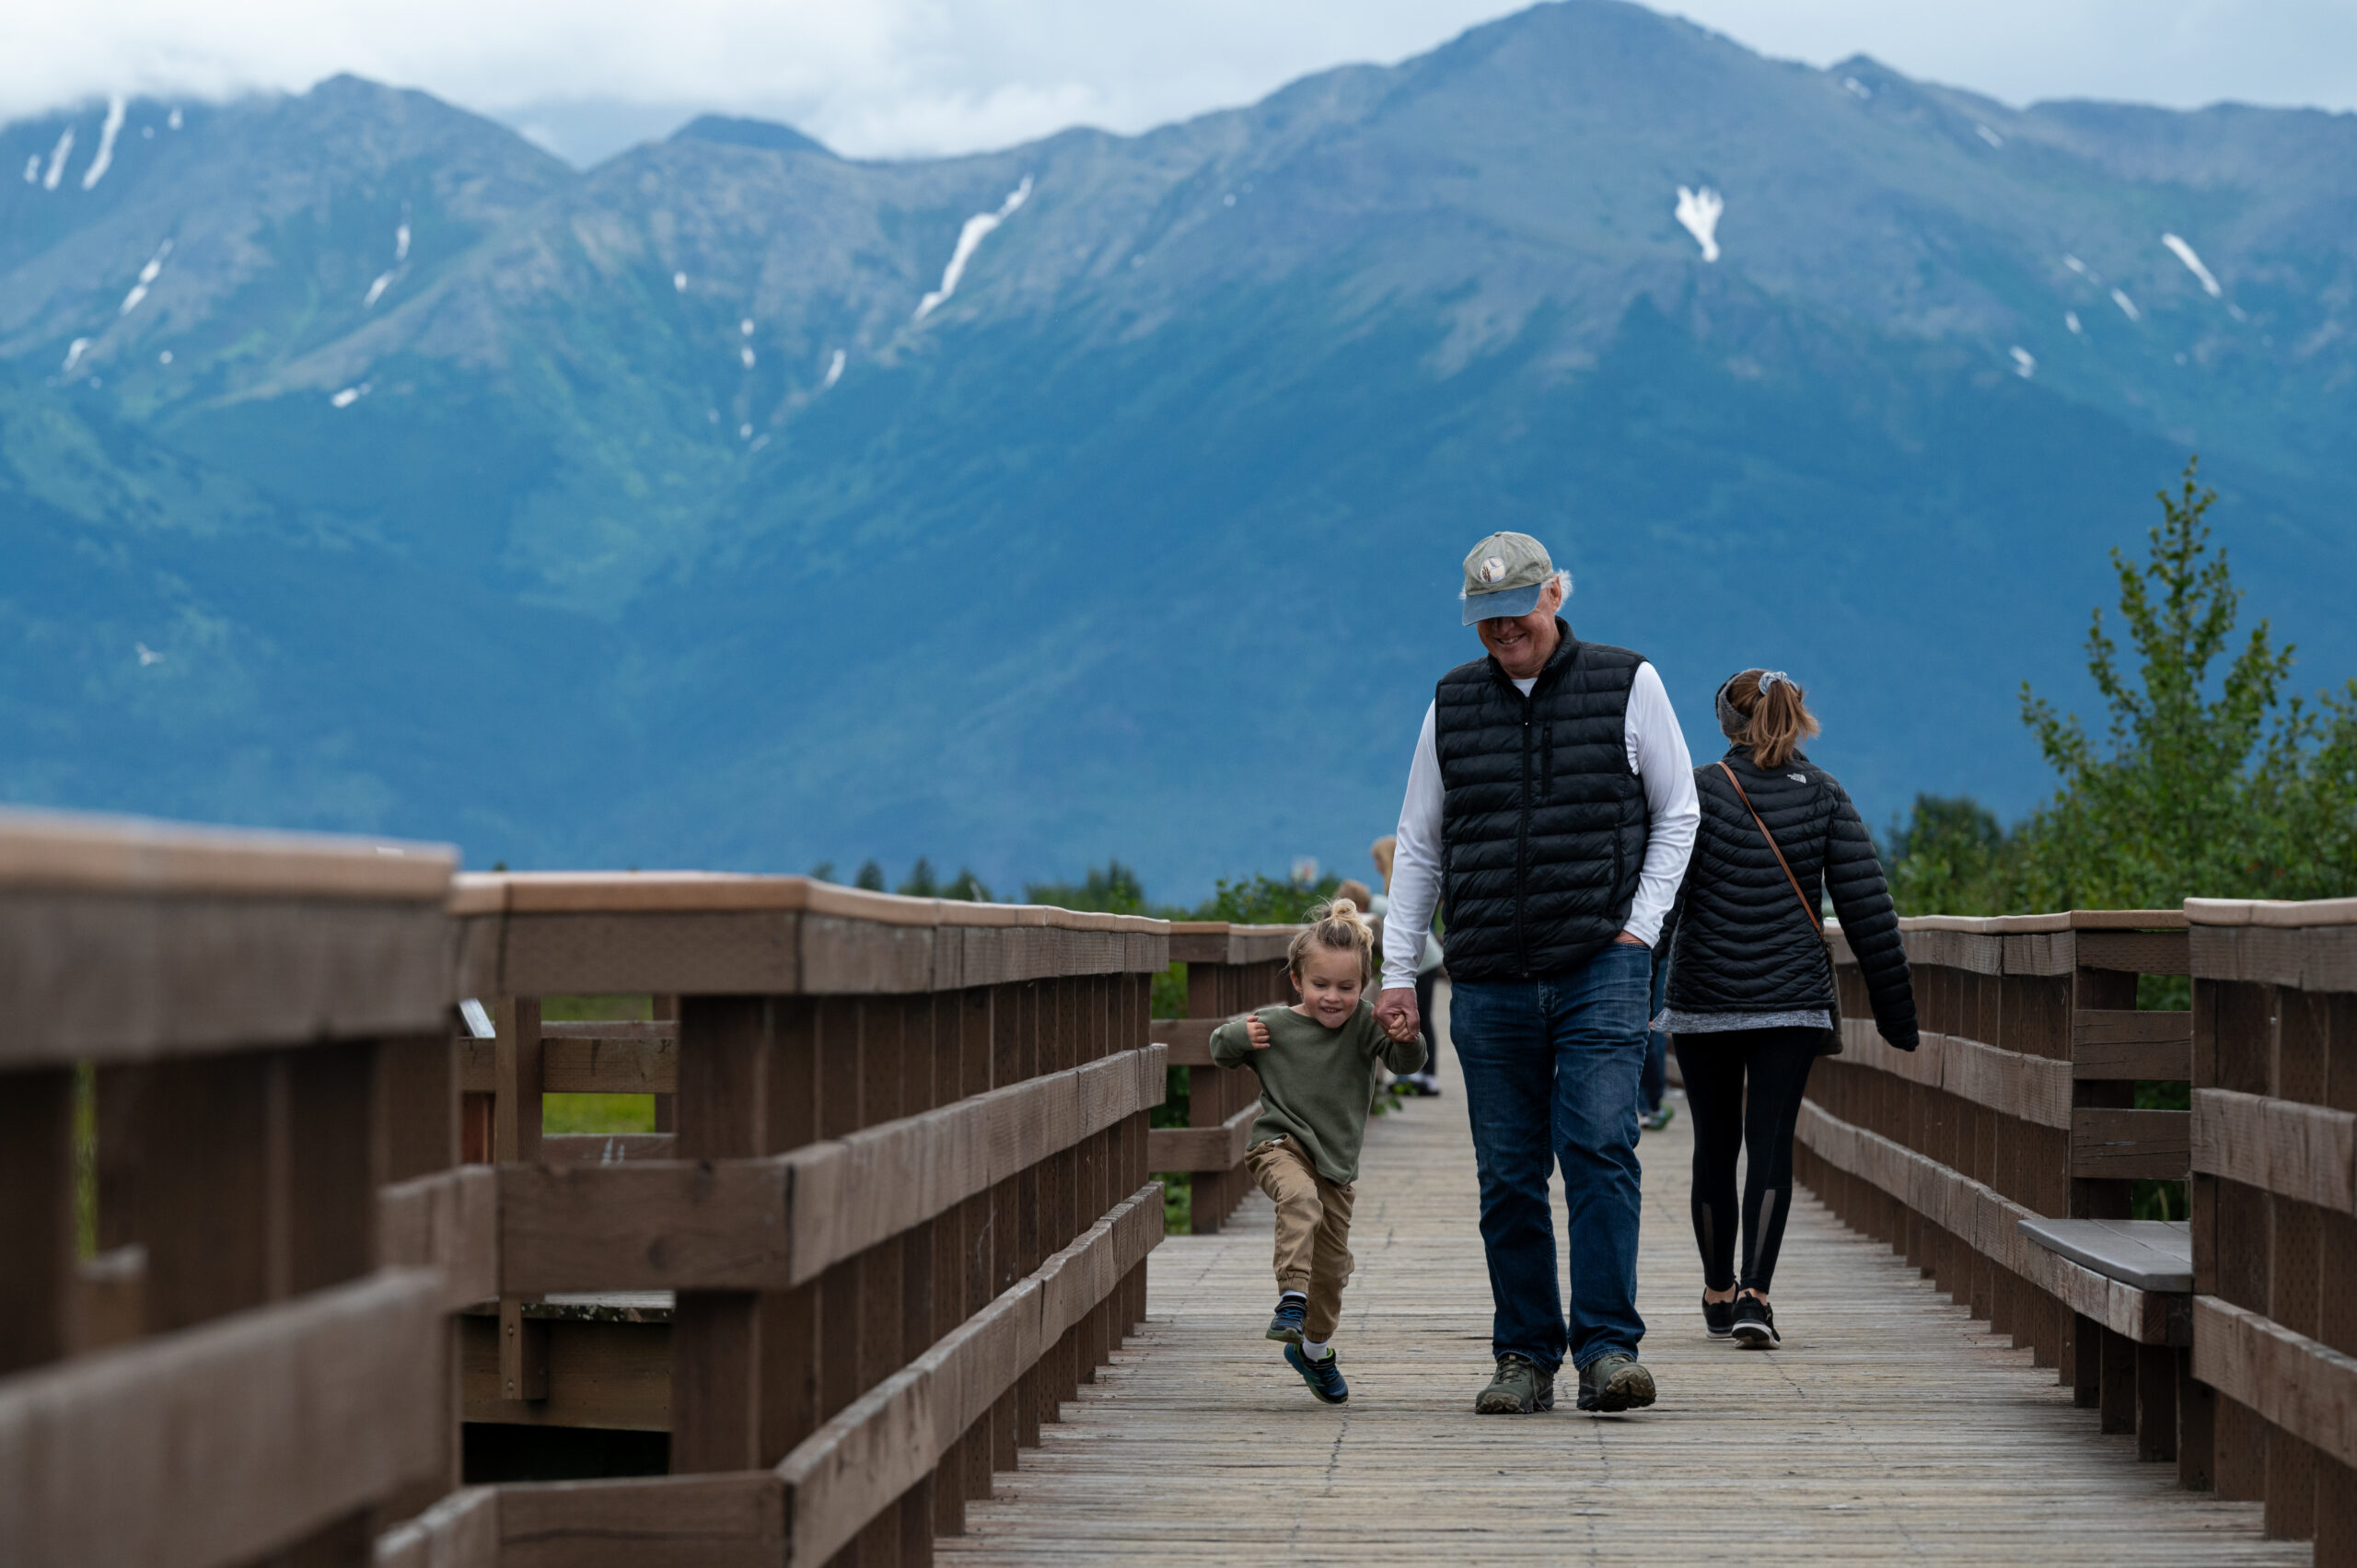 A man in a black vest walks with his grandson on a boardwalk.